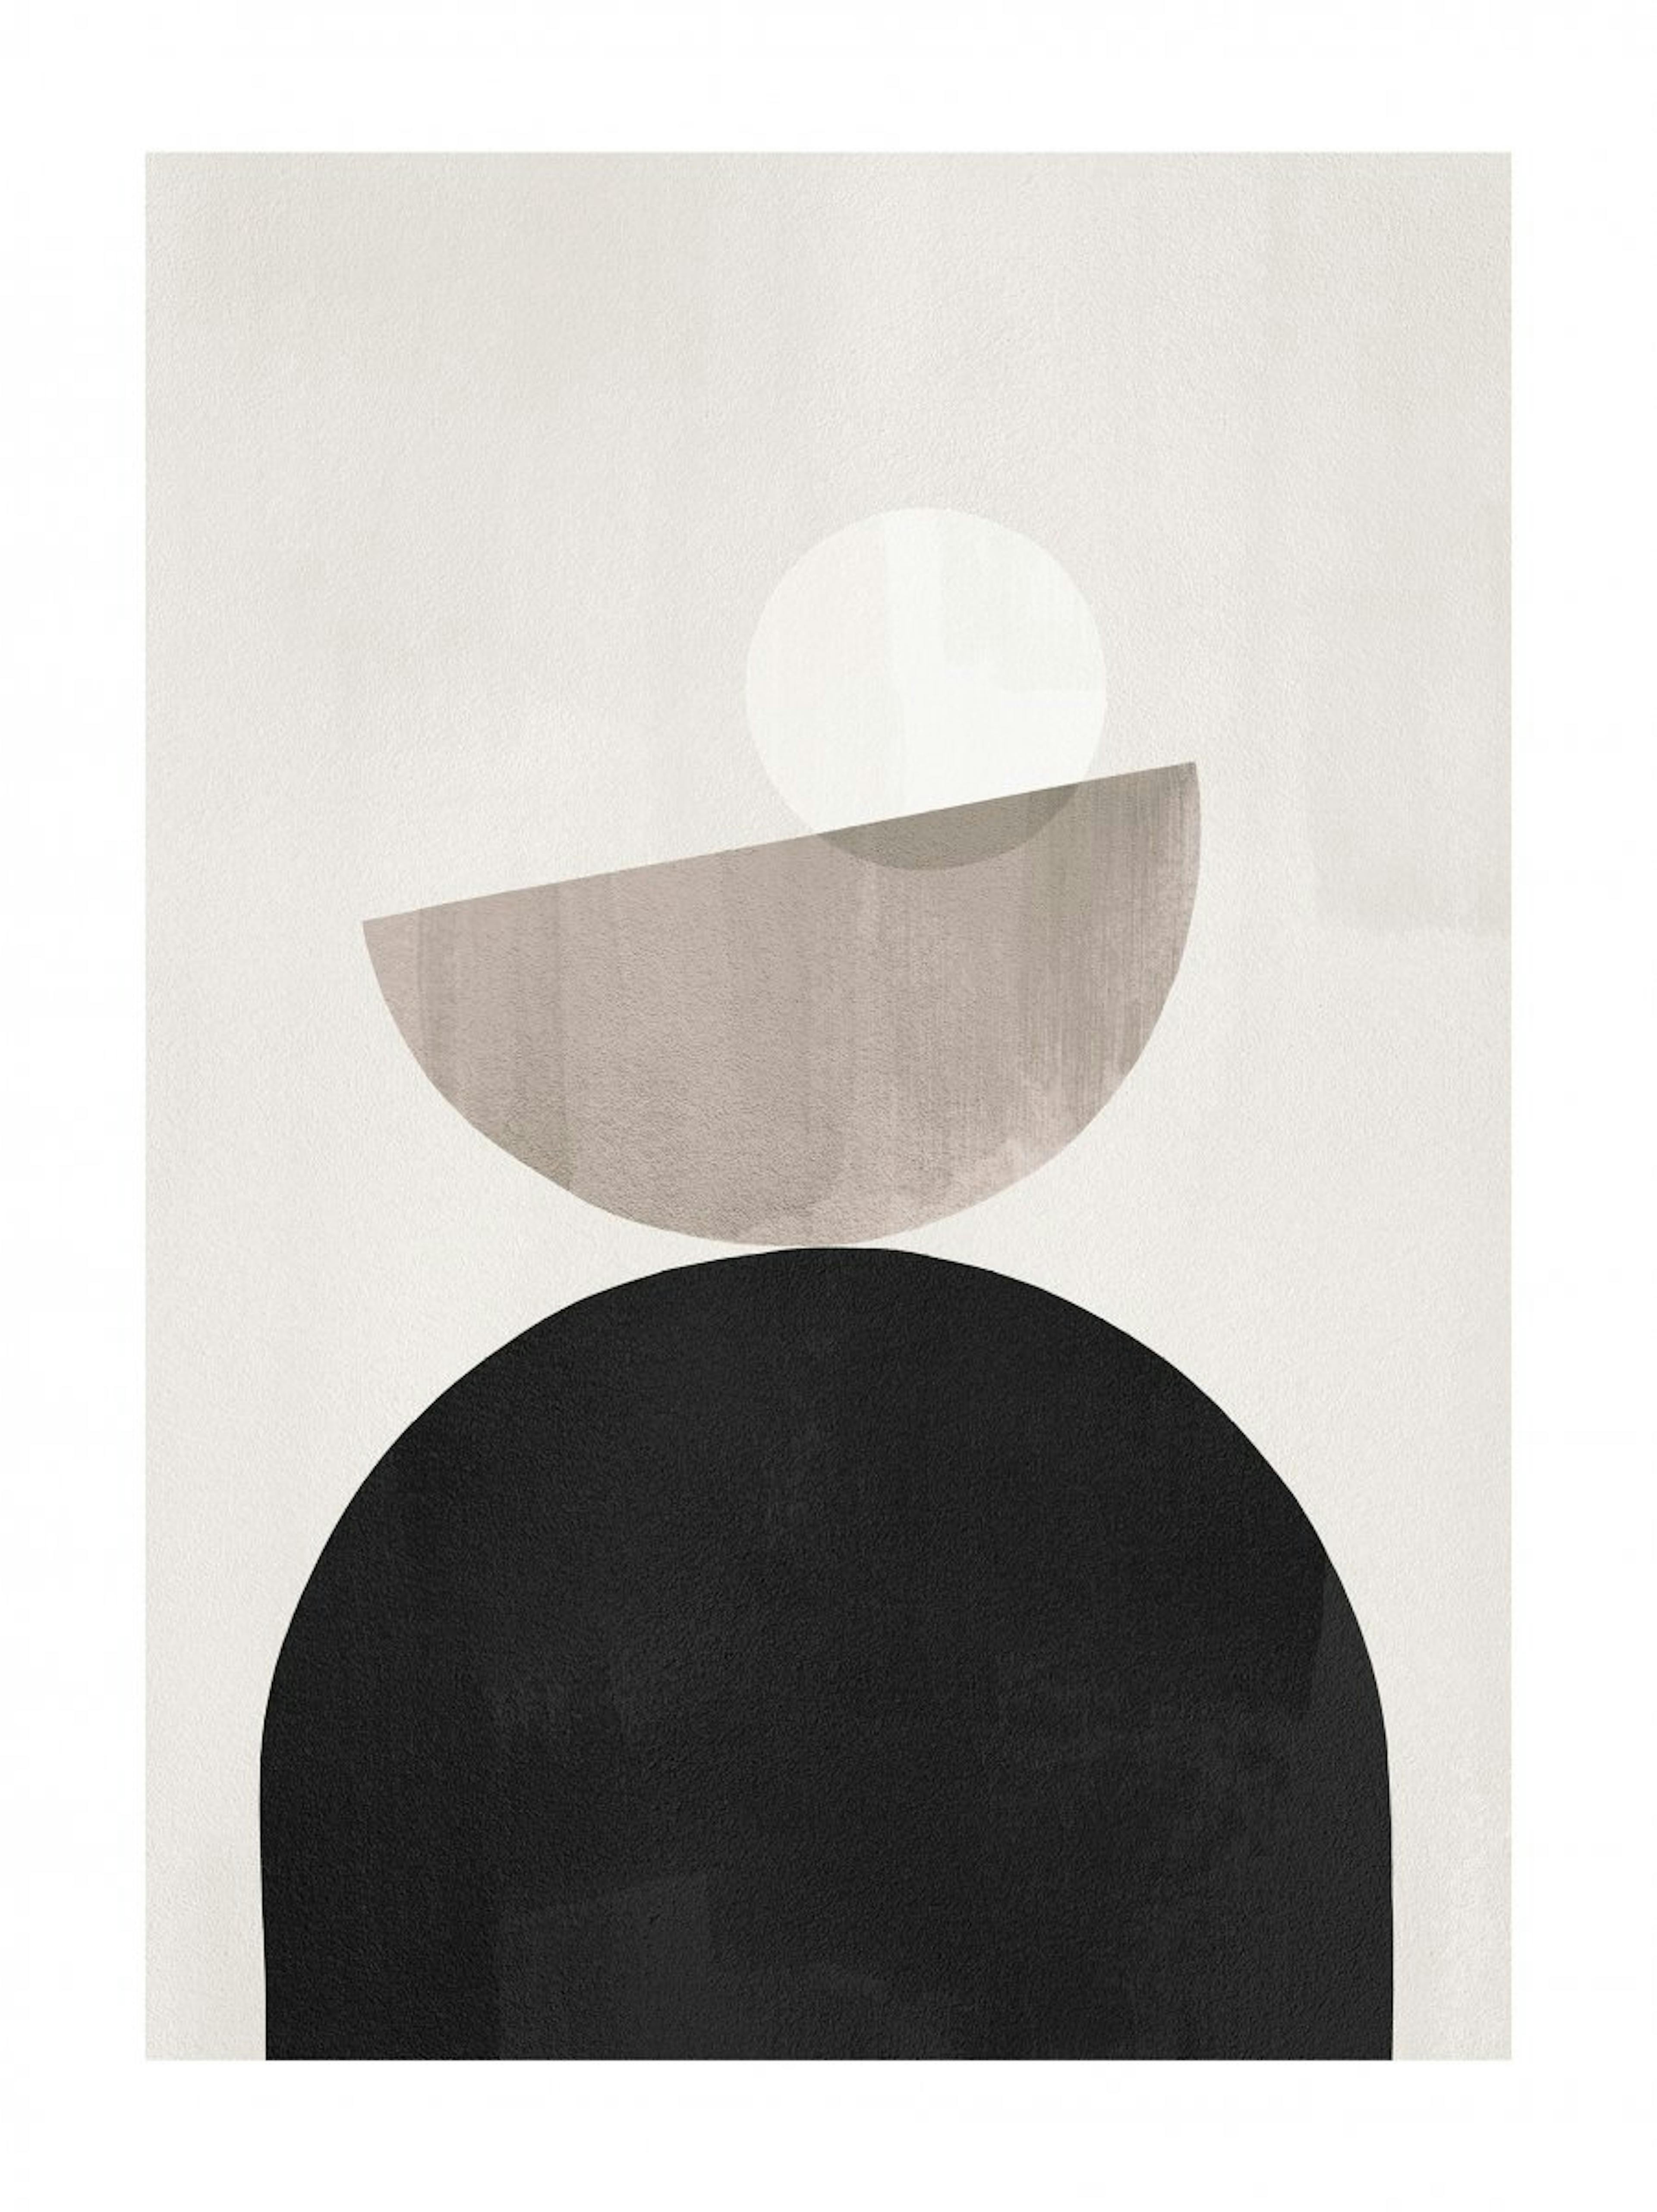 Graphic Shapes No4 Poster 0